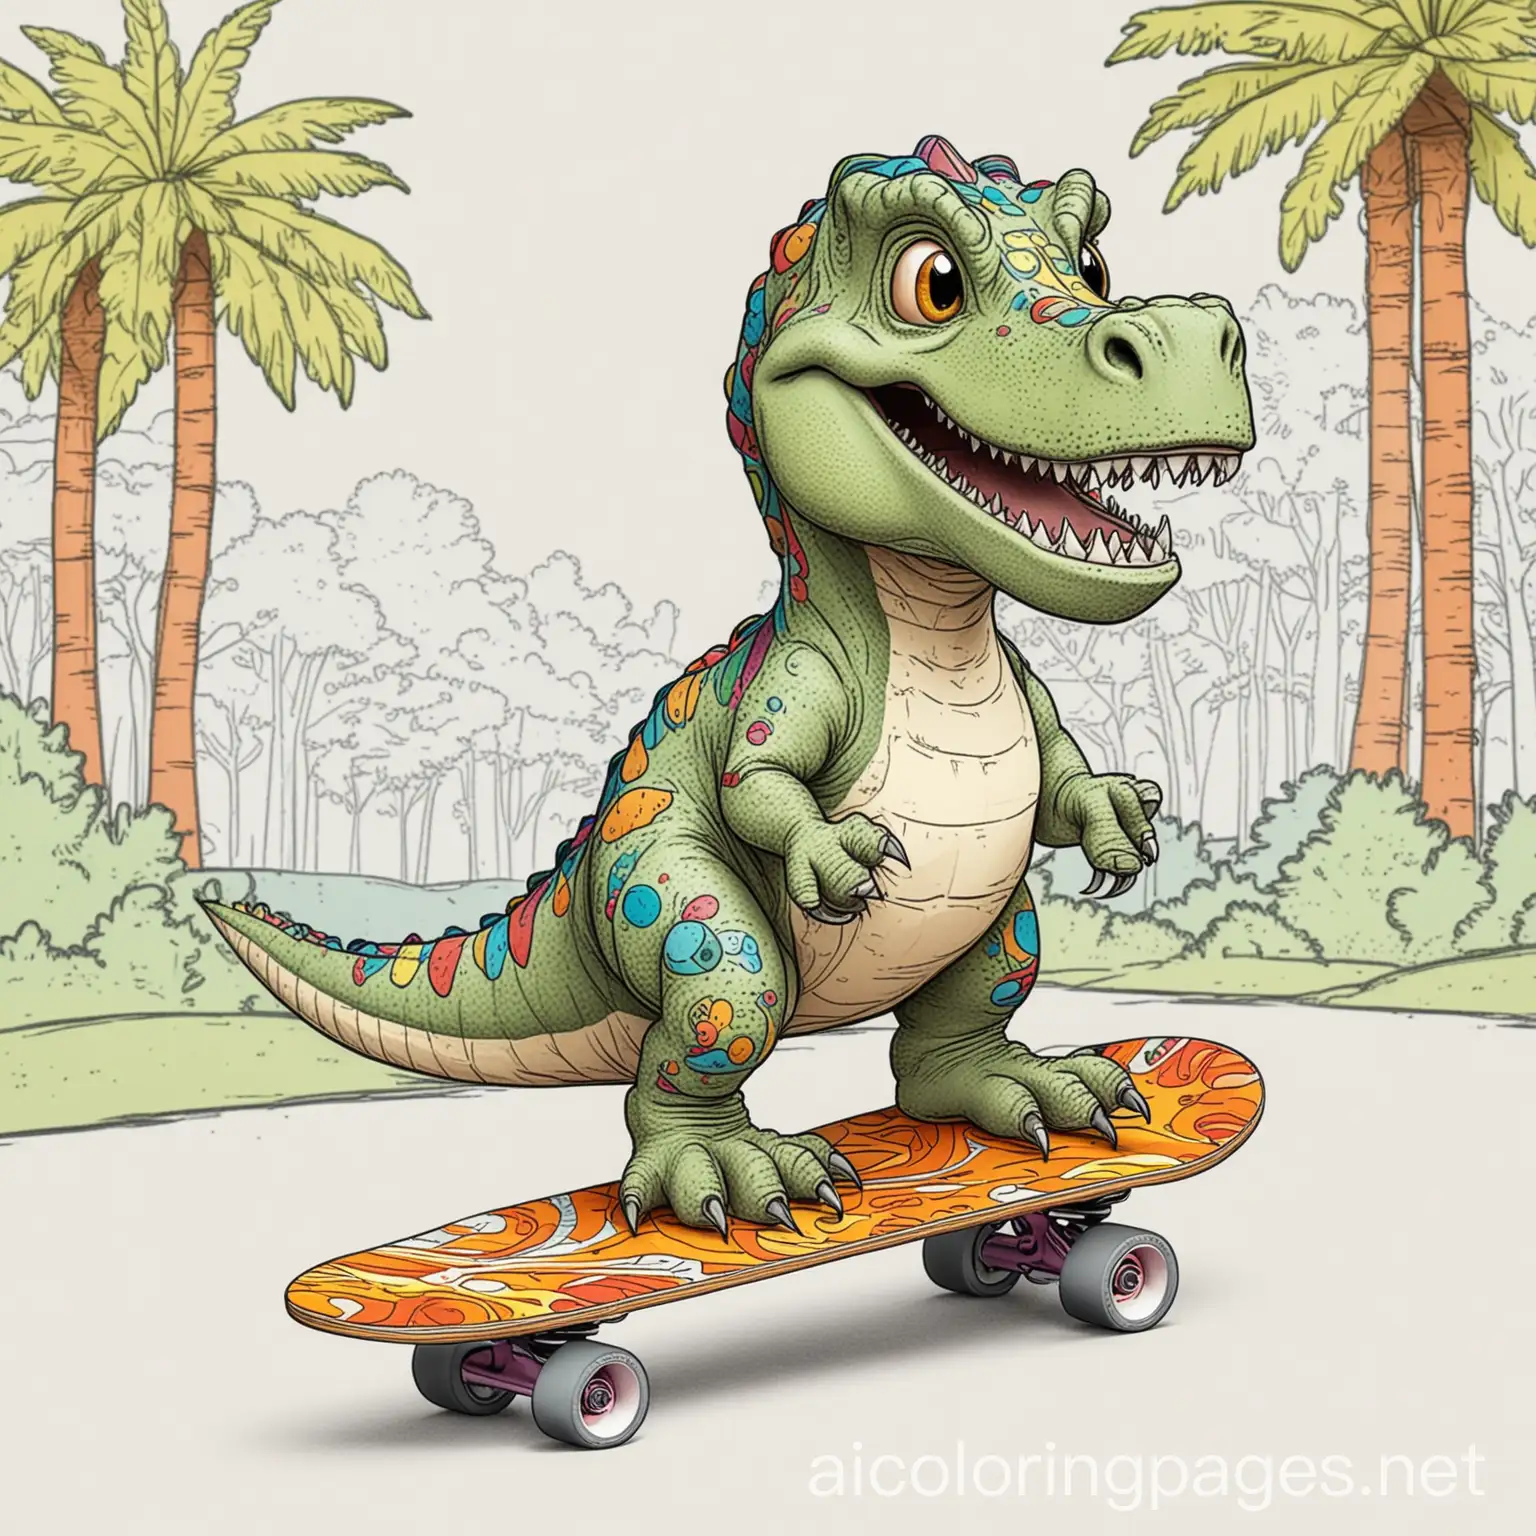 A colored in drawing of a dinosaur on a skateboard smiling. A park is behind him. Vivid colours. Like a child colored it in, Coloring Page, black and white, line art, white background, Simplicity, Ample White Space. The background of the coloring page is plain white to make it easy for young children to color within the lines. The outlines of all the subjects are easy to distinguish, making it simple for kids to color without too much difficulty